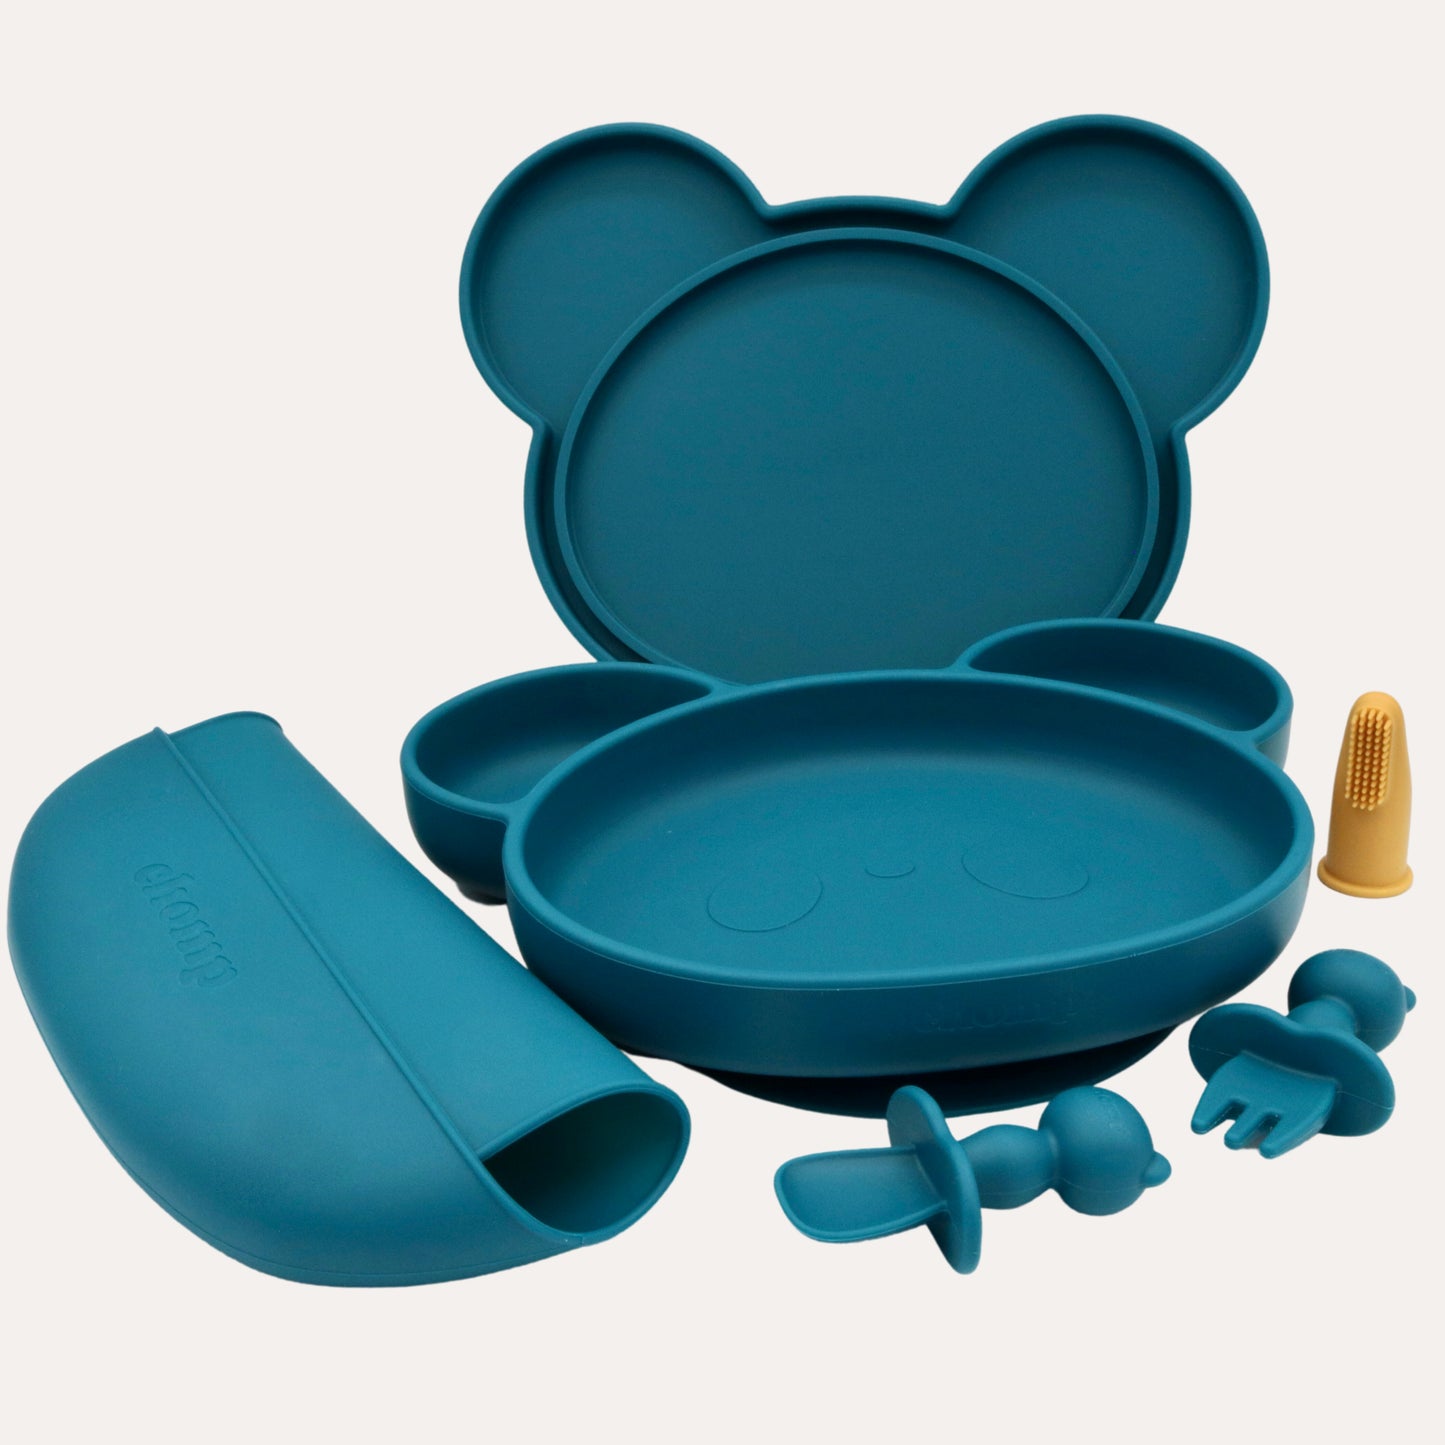 My Little Chomp Weaning Set (6 pieces)